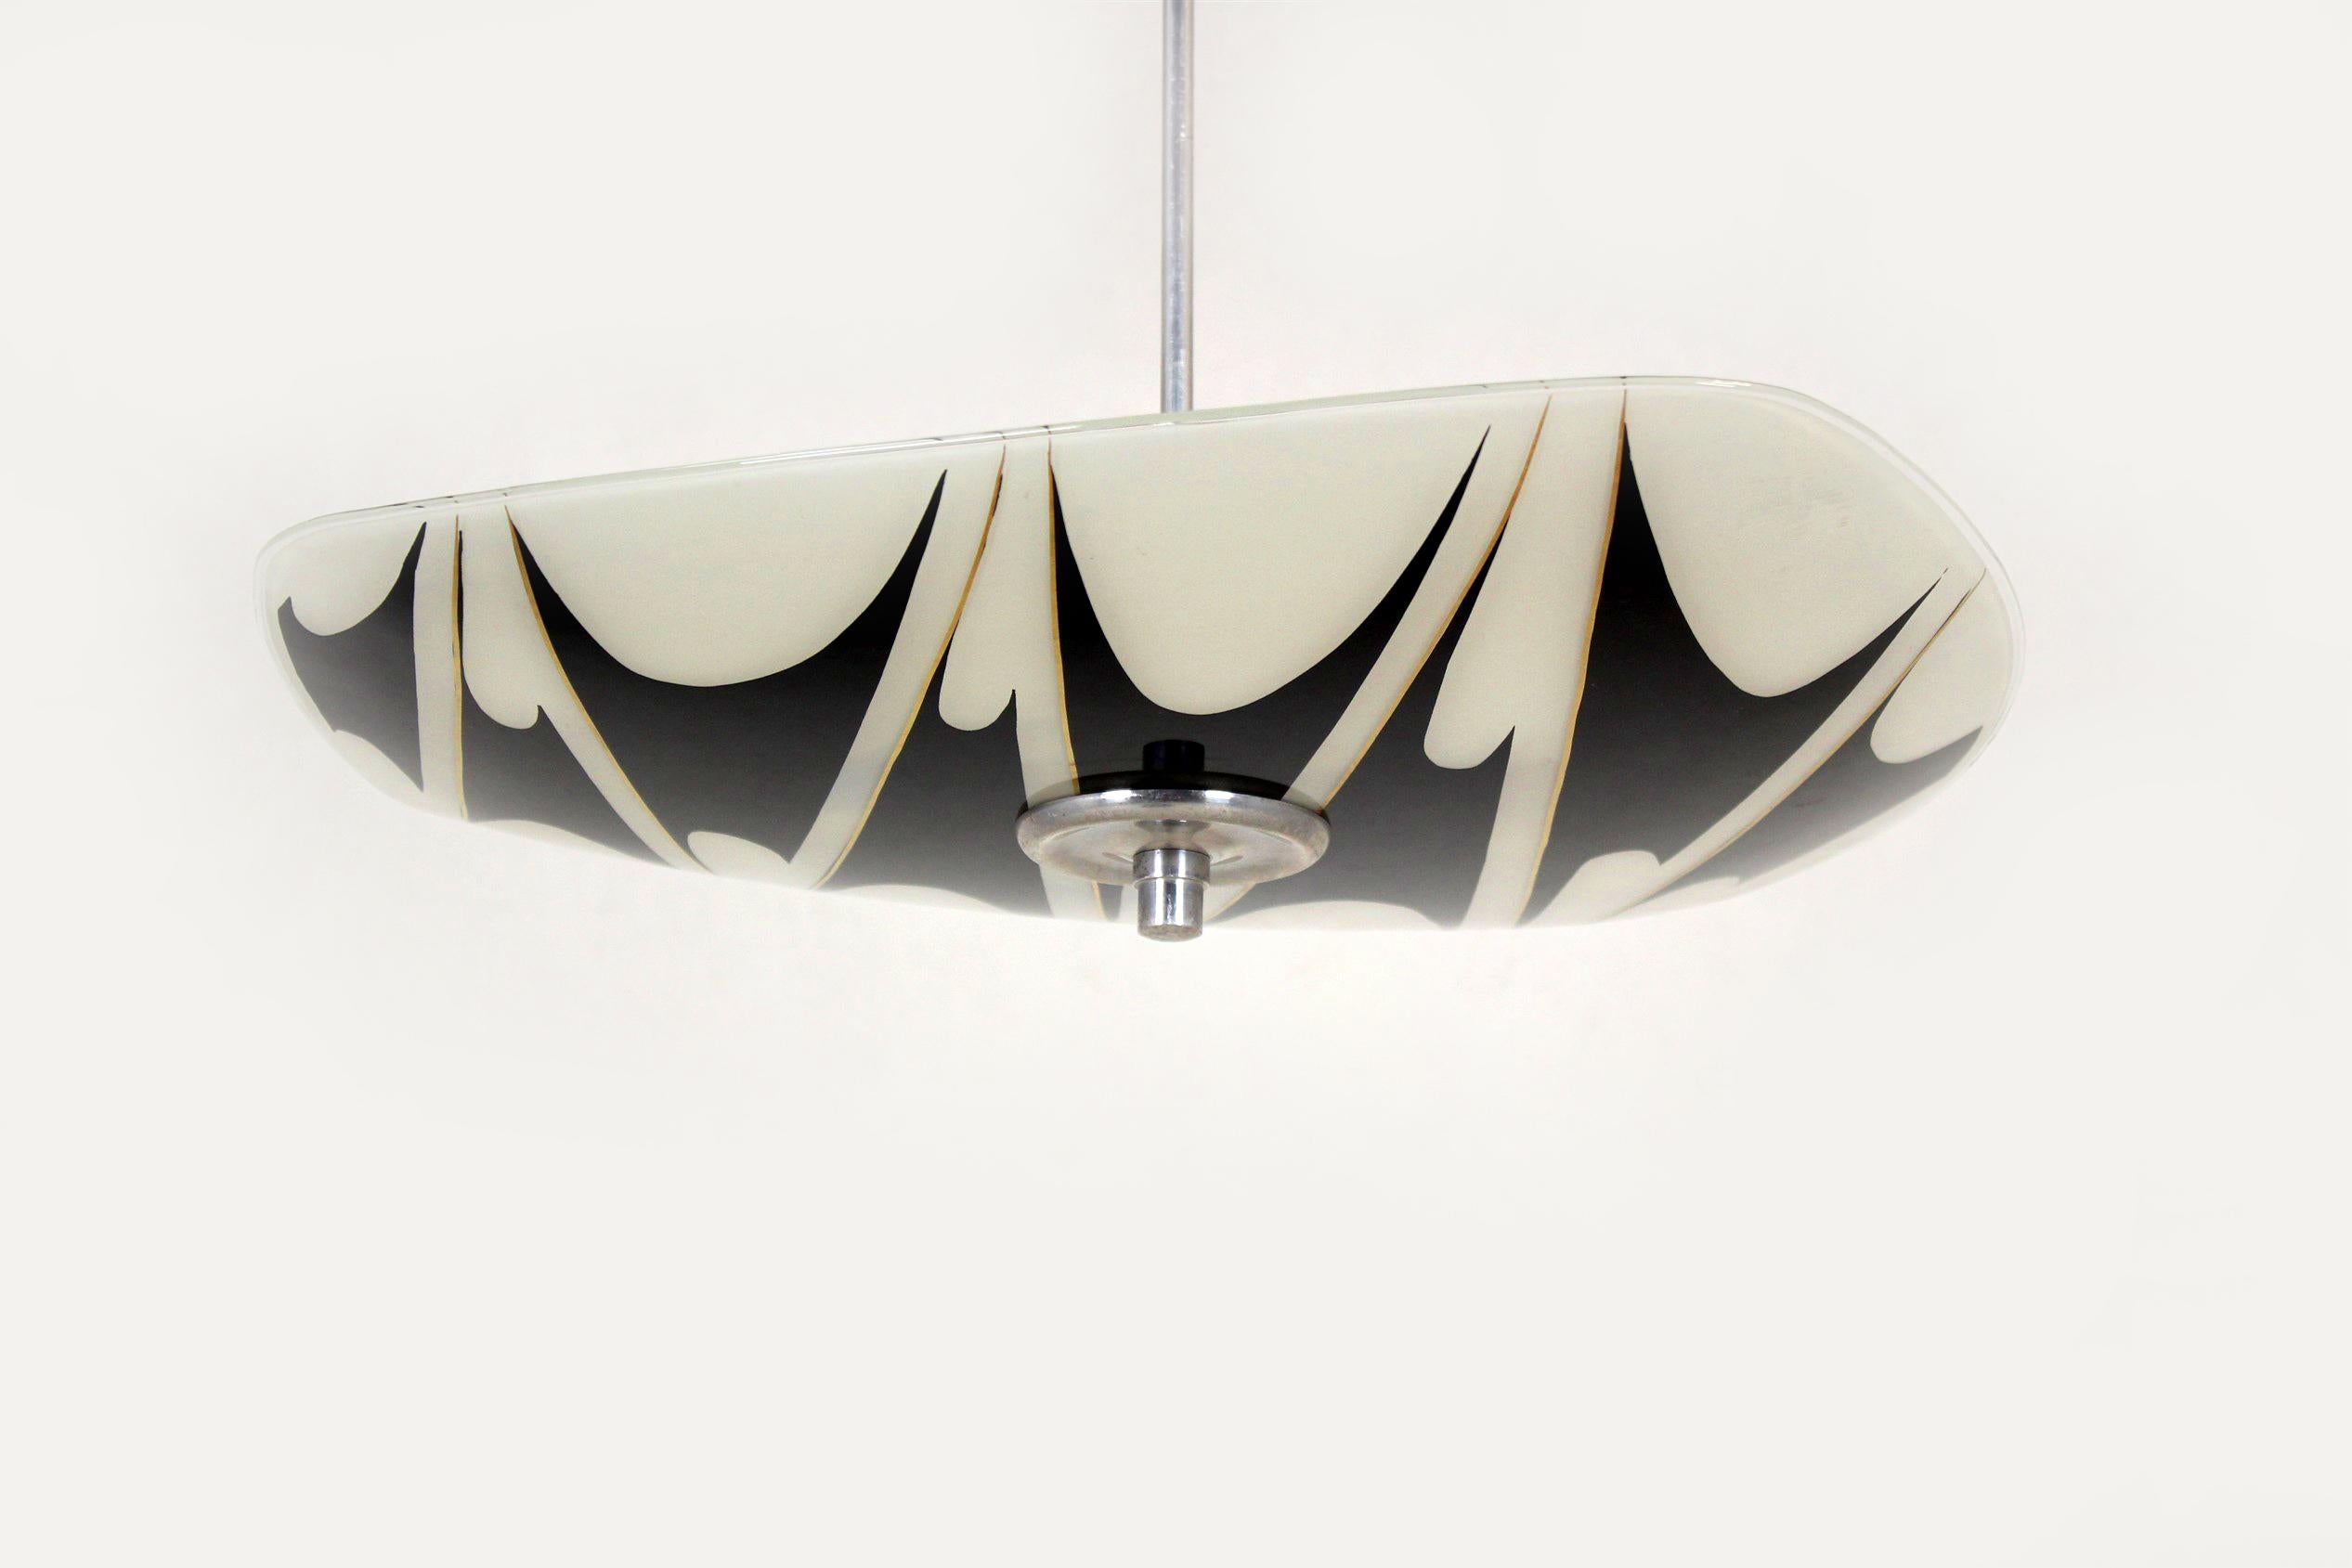 - Ceiling light dating made in the 1960s.
- Features a patterned glass shade.
- Made in former Czechoslovakia by Napako.
- The lamp is fully functional and requires three E27 bulbs.
 